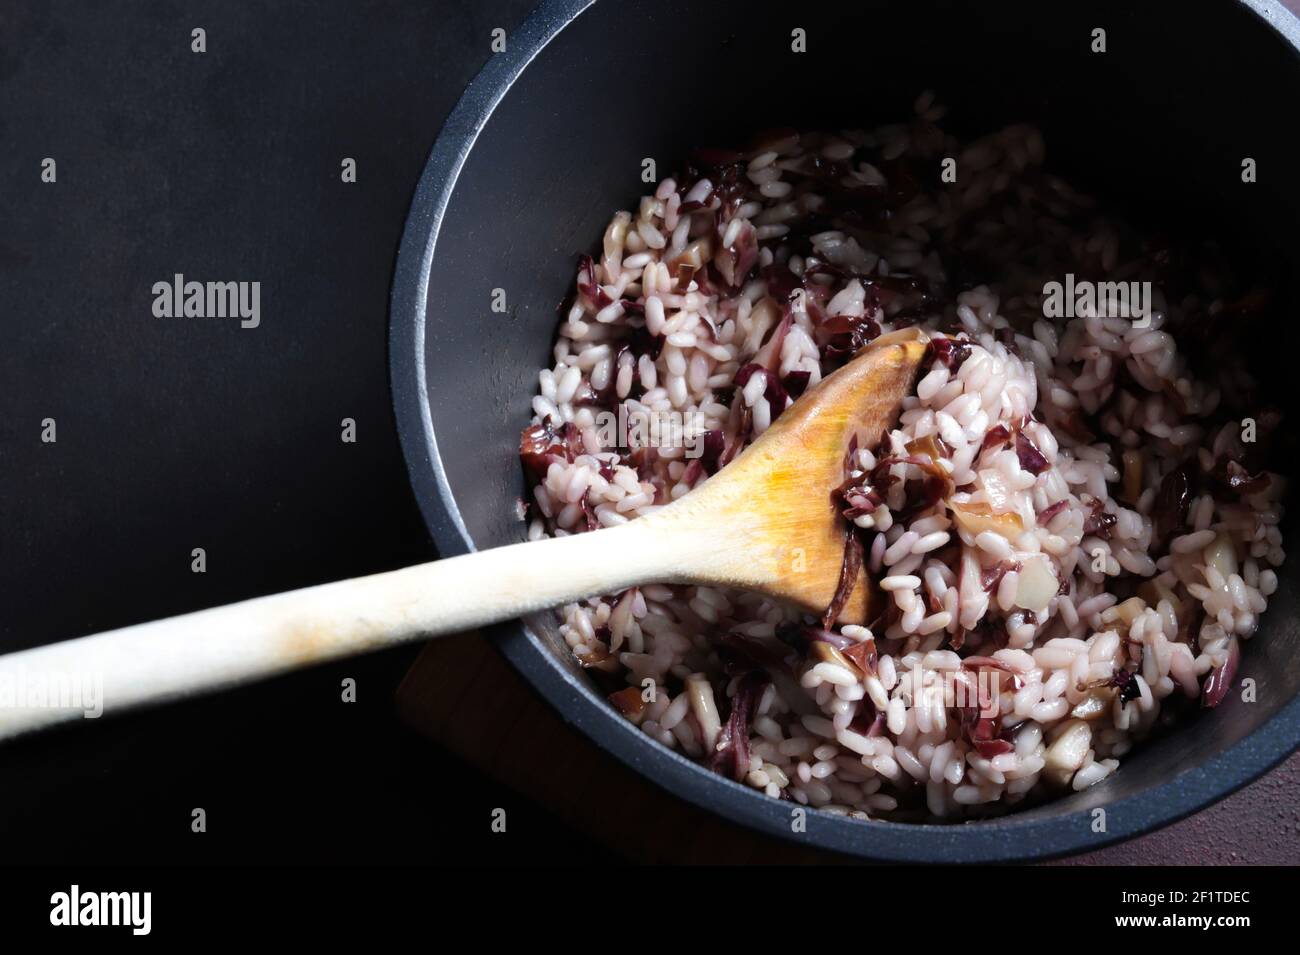 Italian risotto with red radicchio in a pan  on dark background. Venetian cuisine, Italy. View from above. Stock Photo